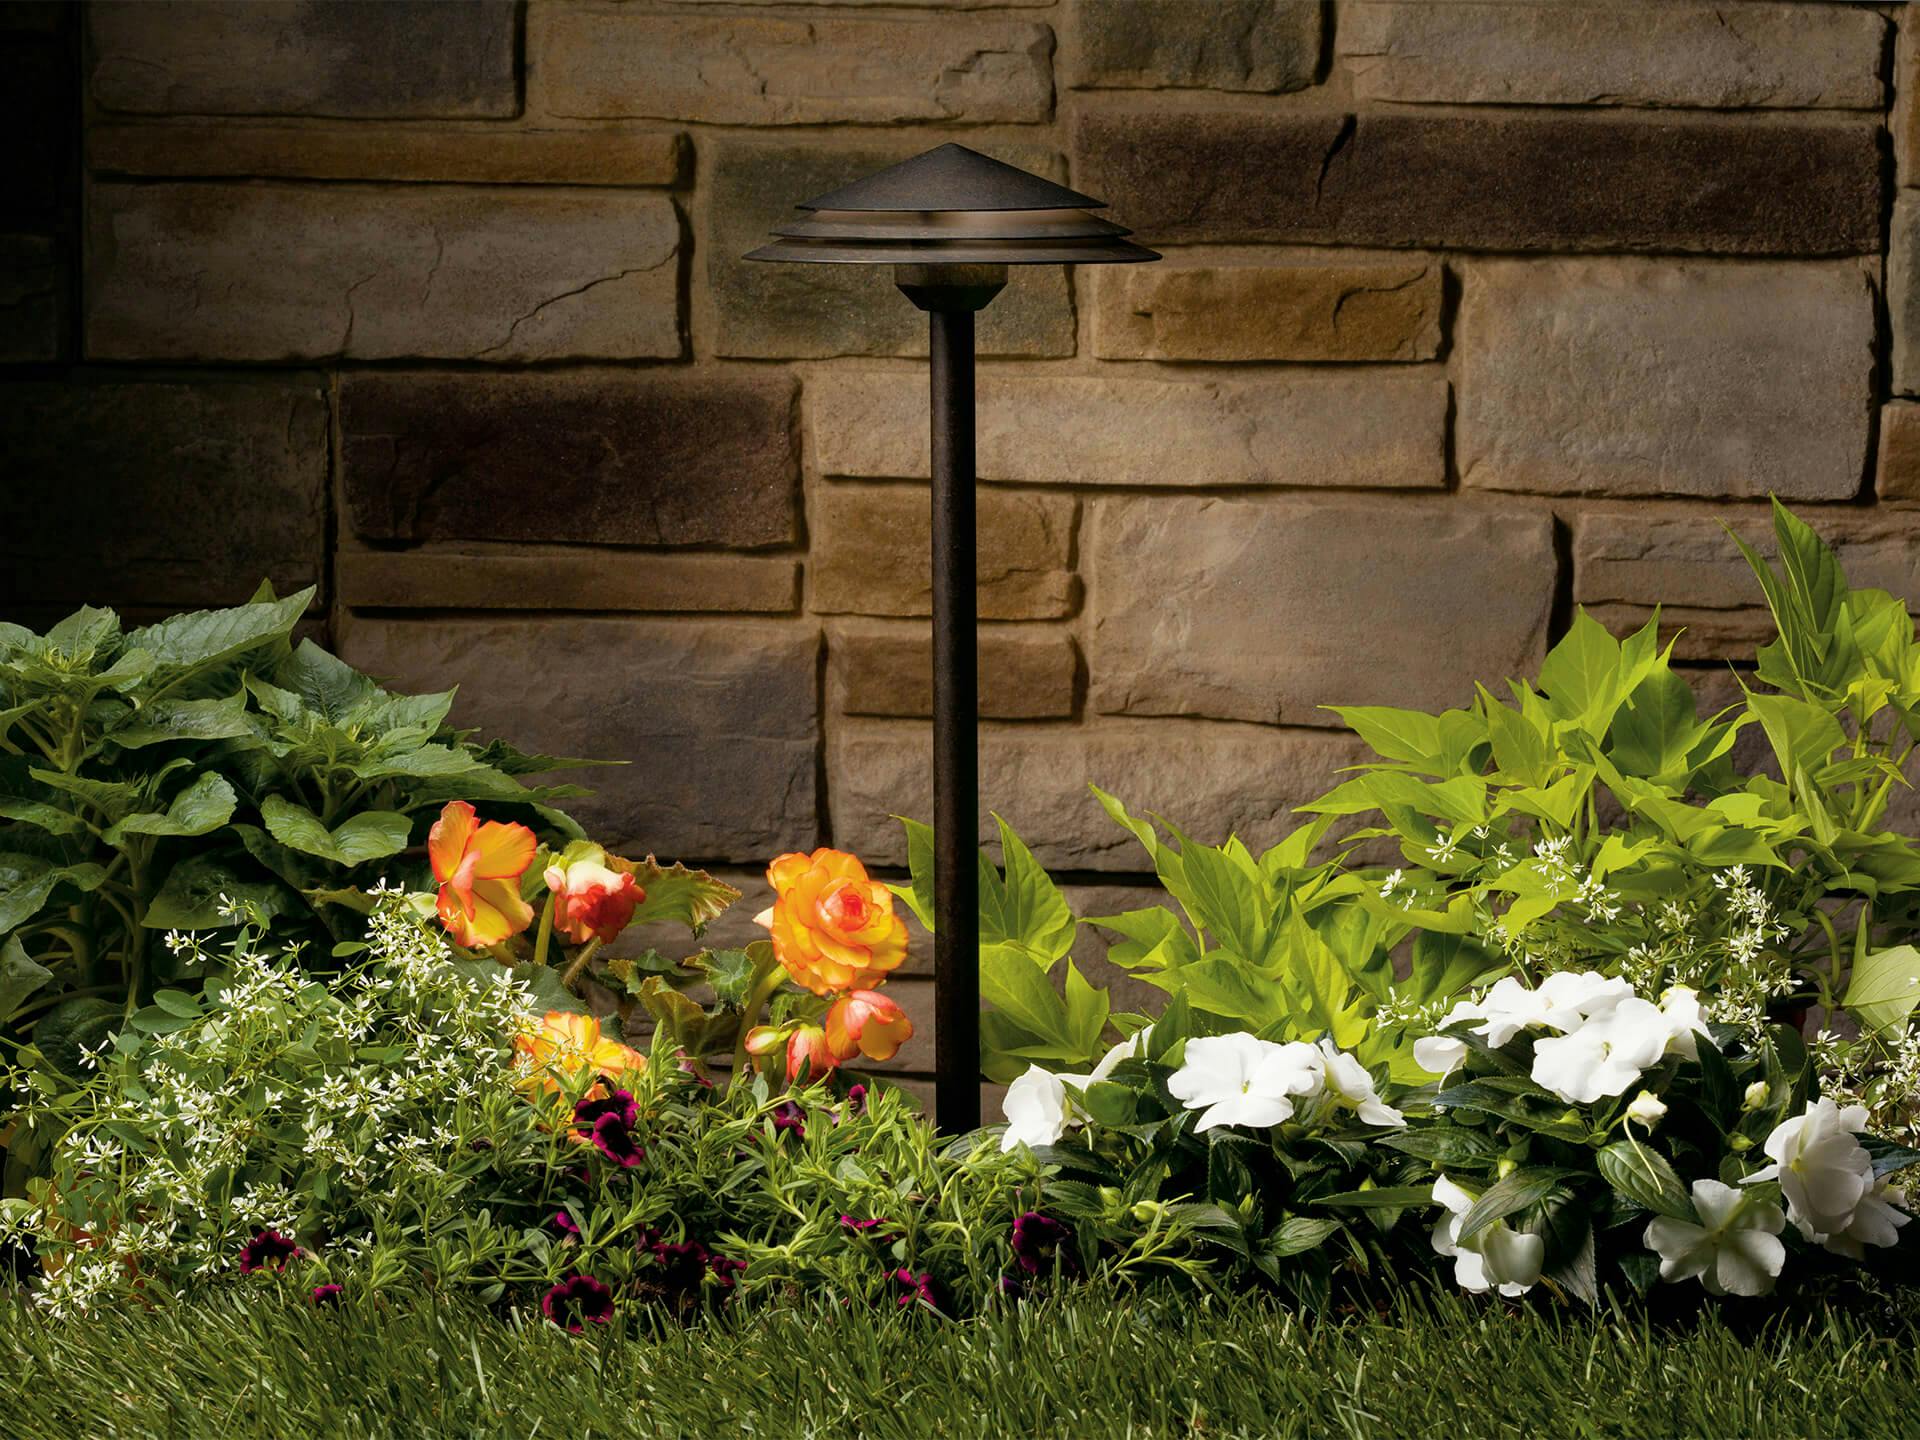 Close up of a path light in a garden with a stone wall behind it and flowerbed around it